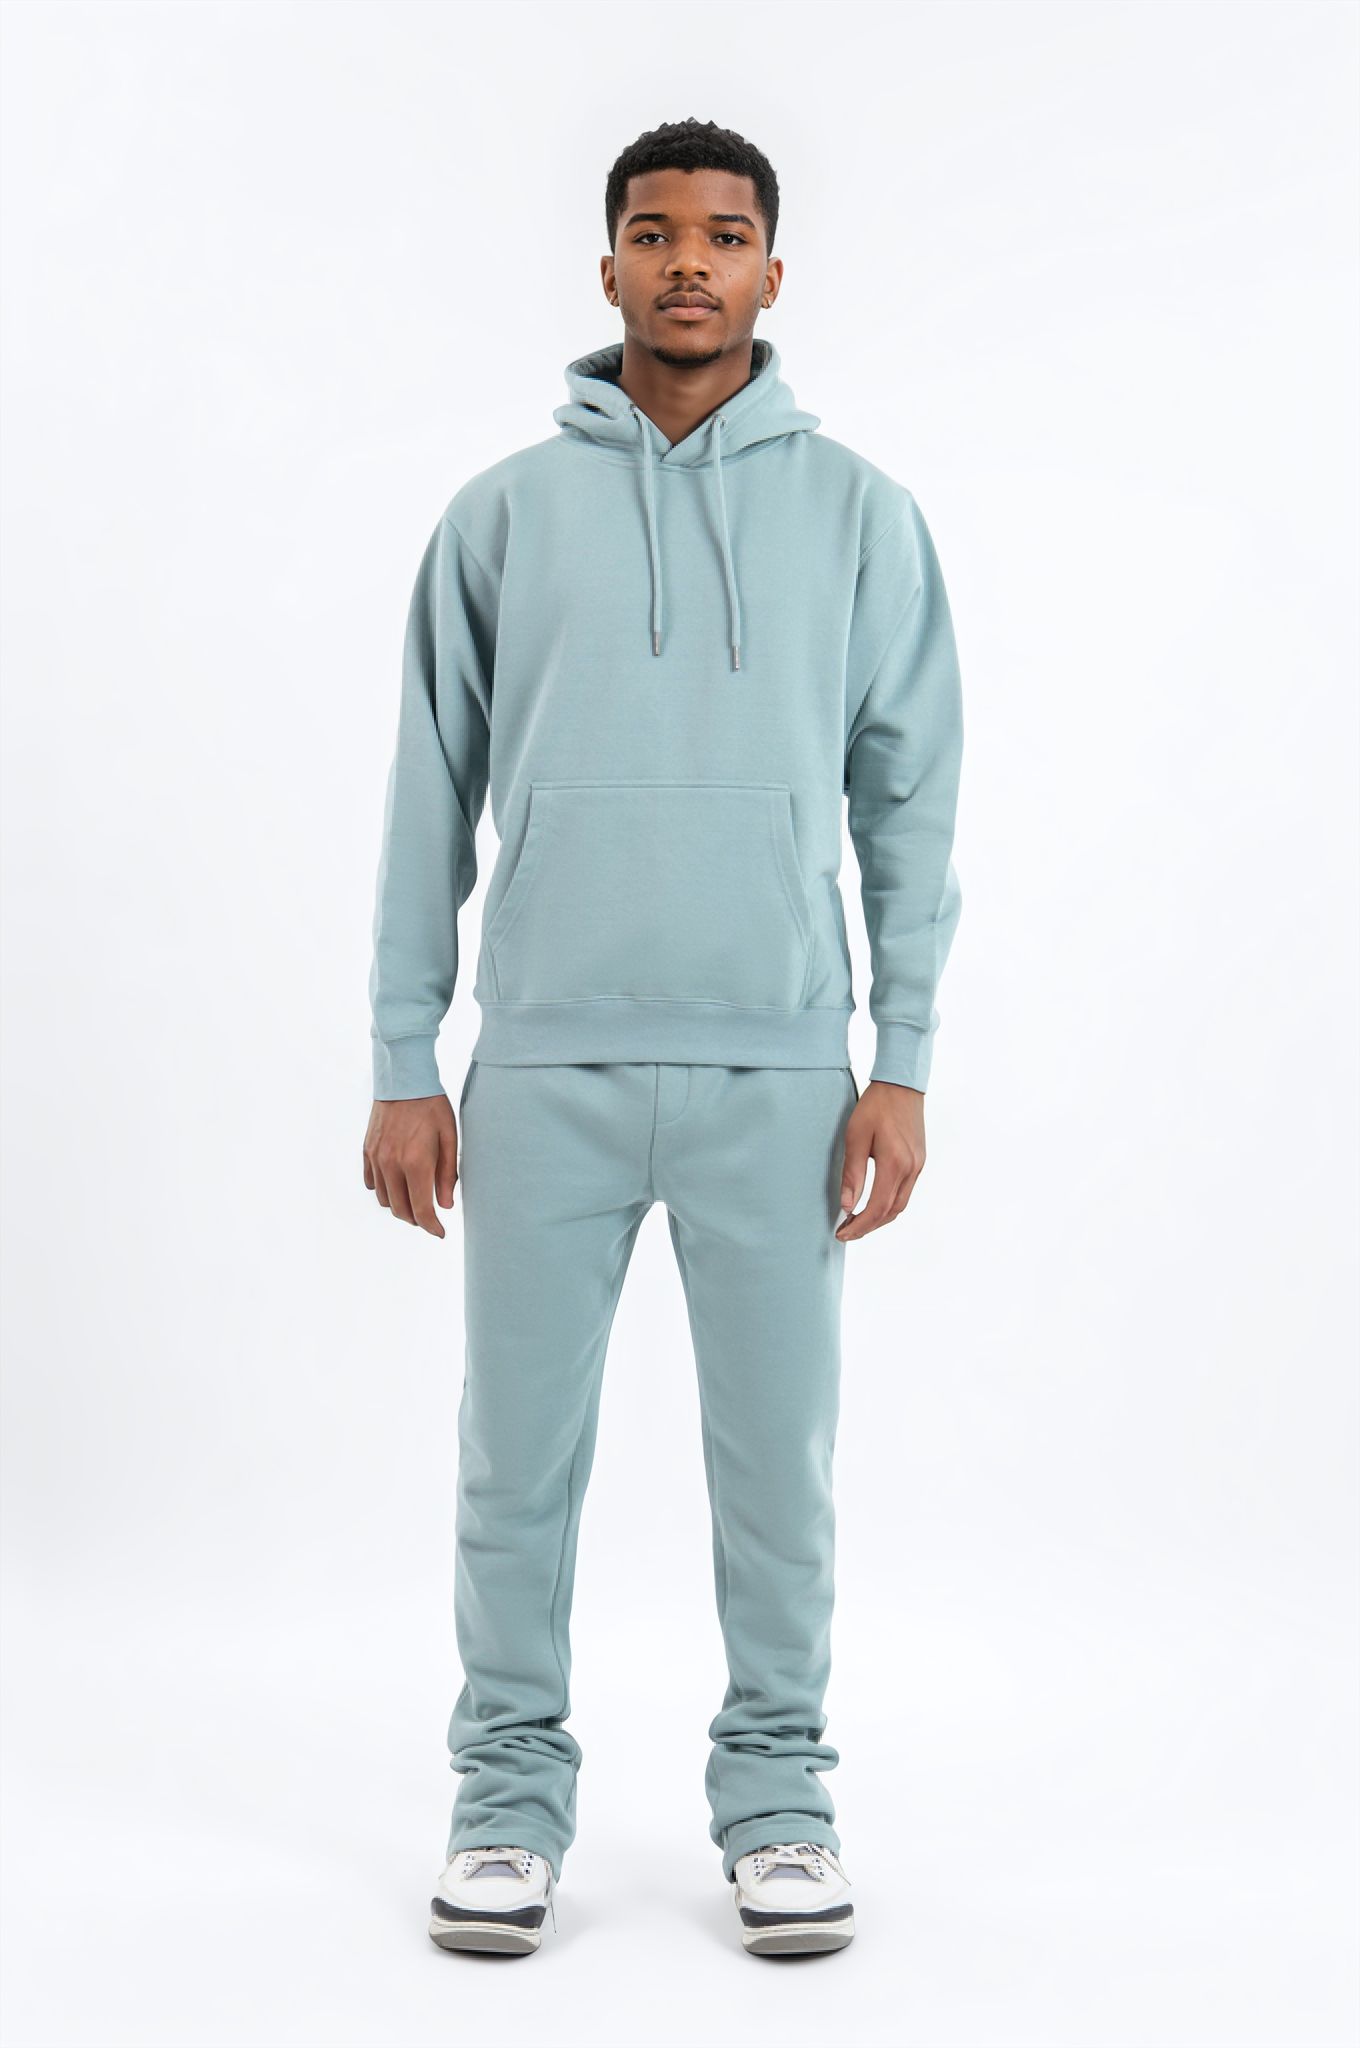 Teal Flared Sweatsuit